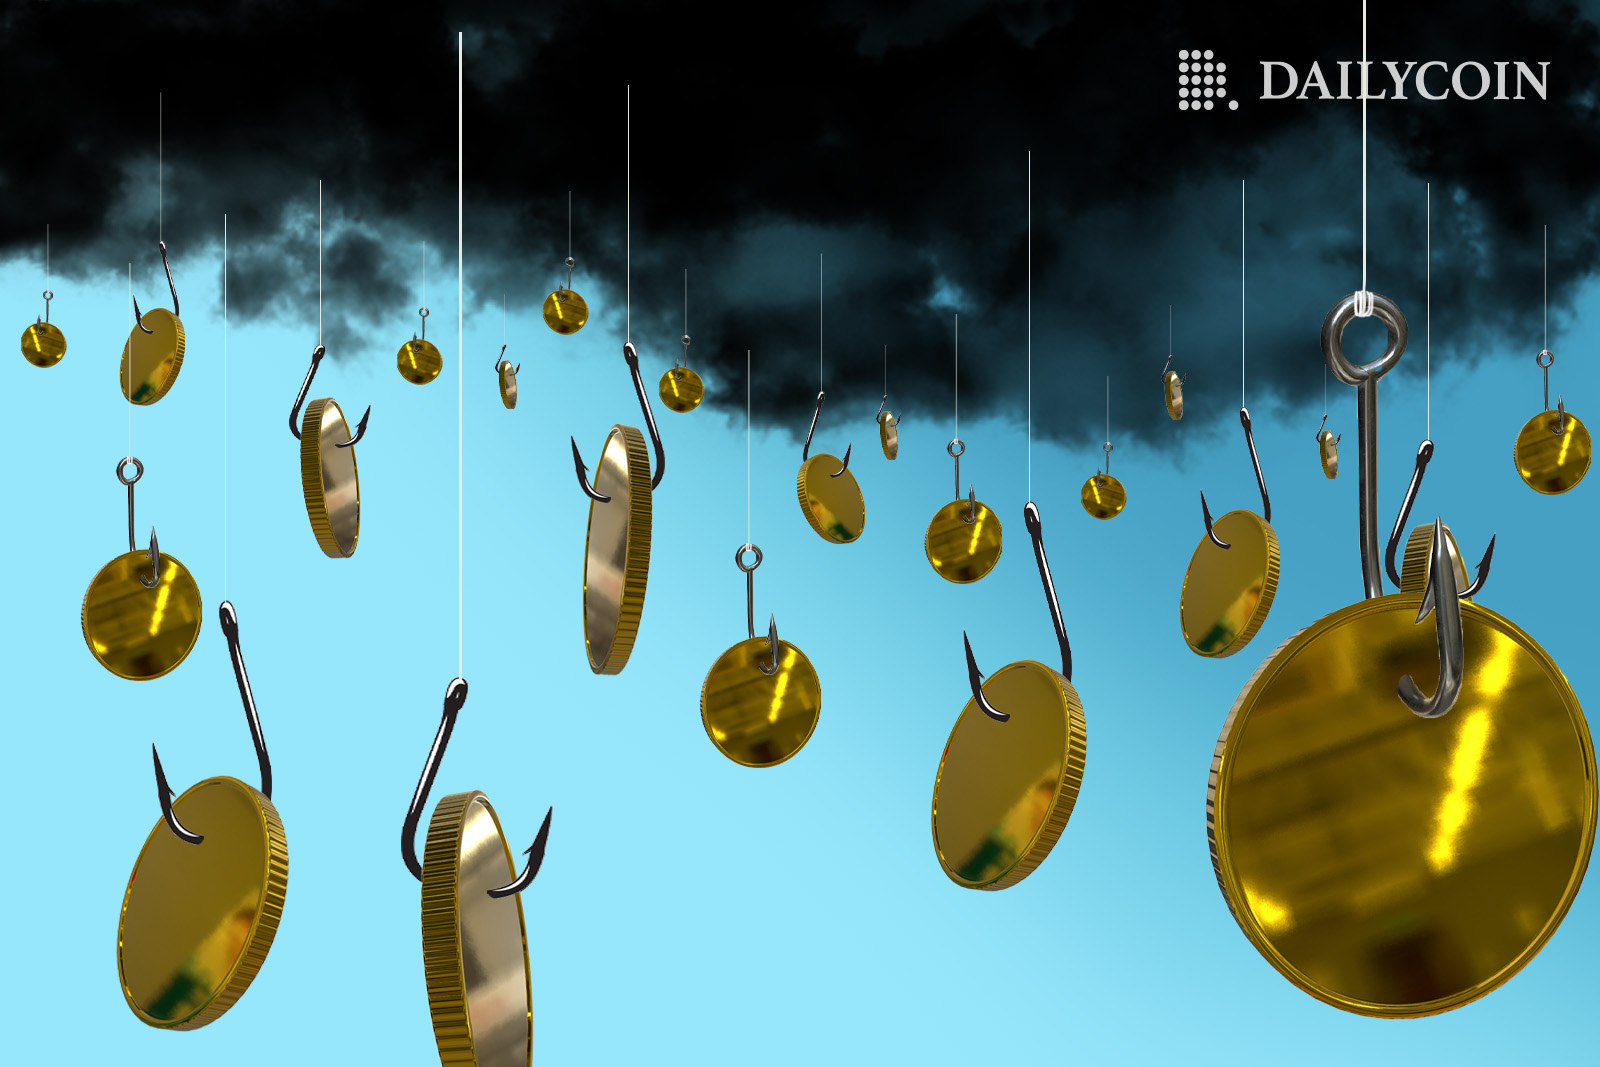 coins on a hook, coming from a cloudy sky. The illustration aims to represent crypto scams.